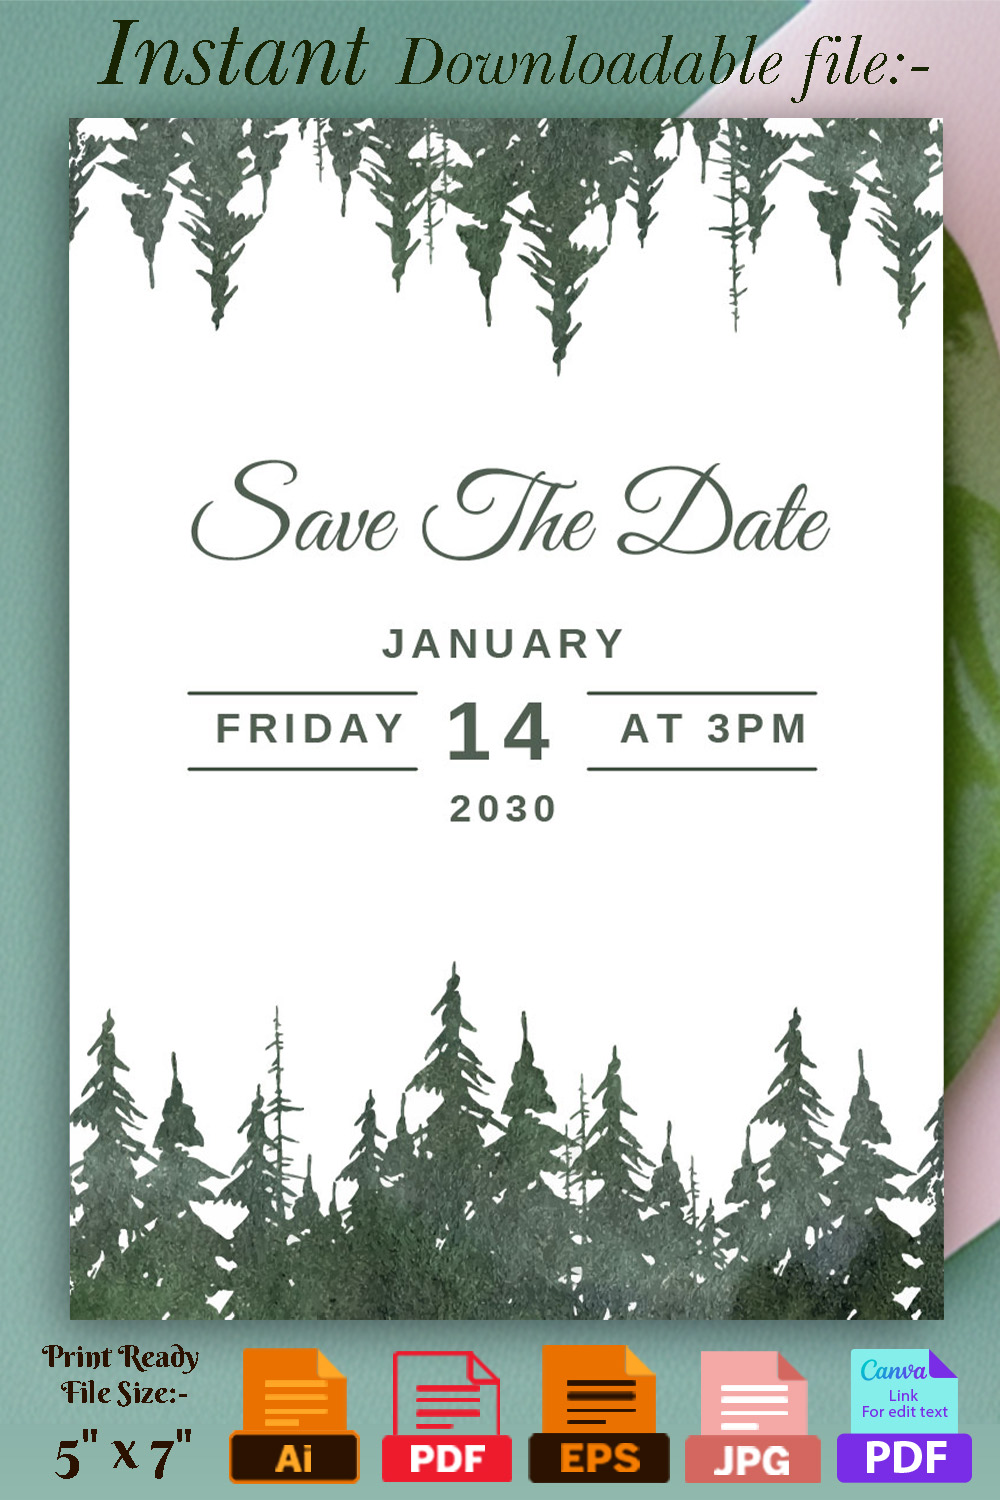 Image of irresistible wedding card with winter design